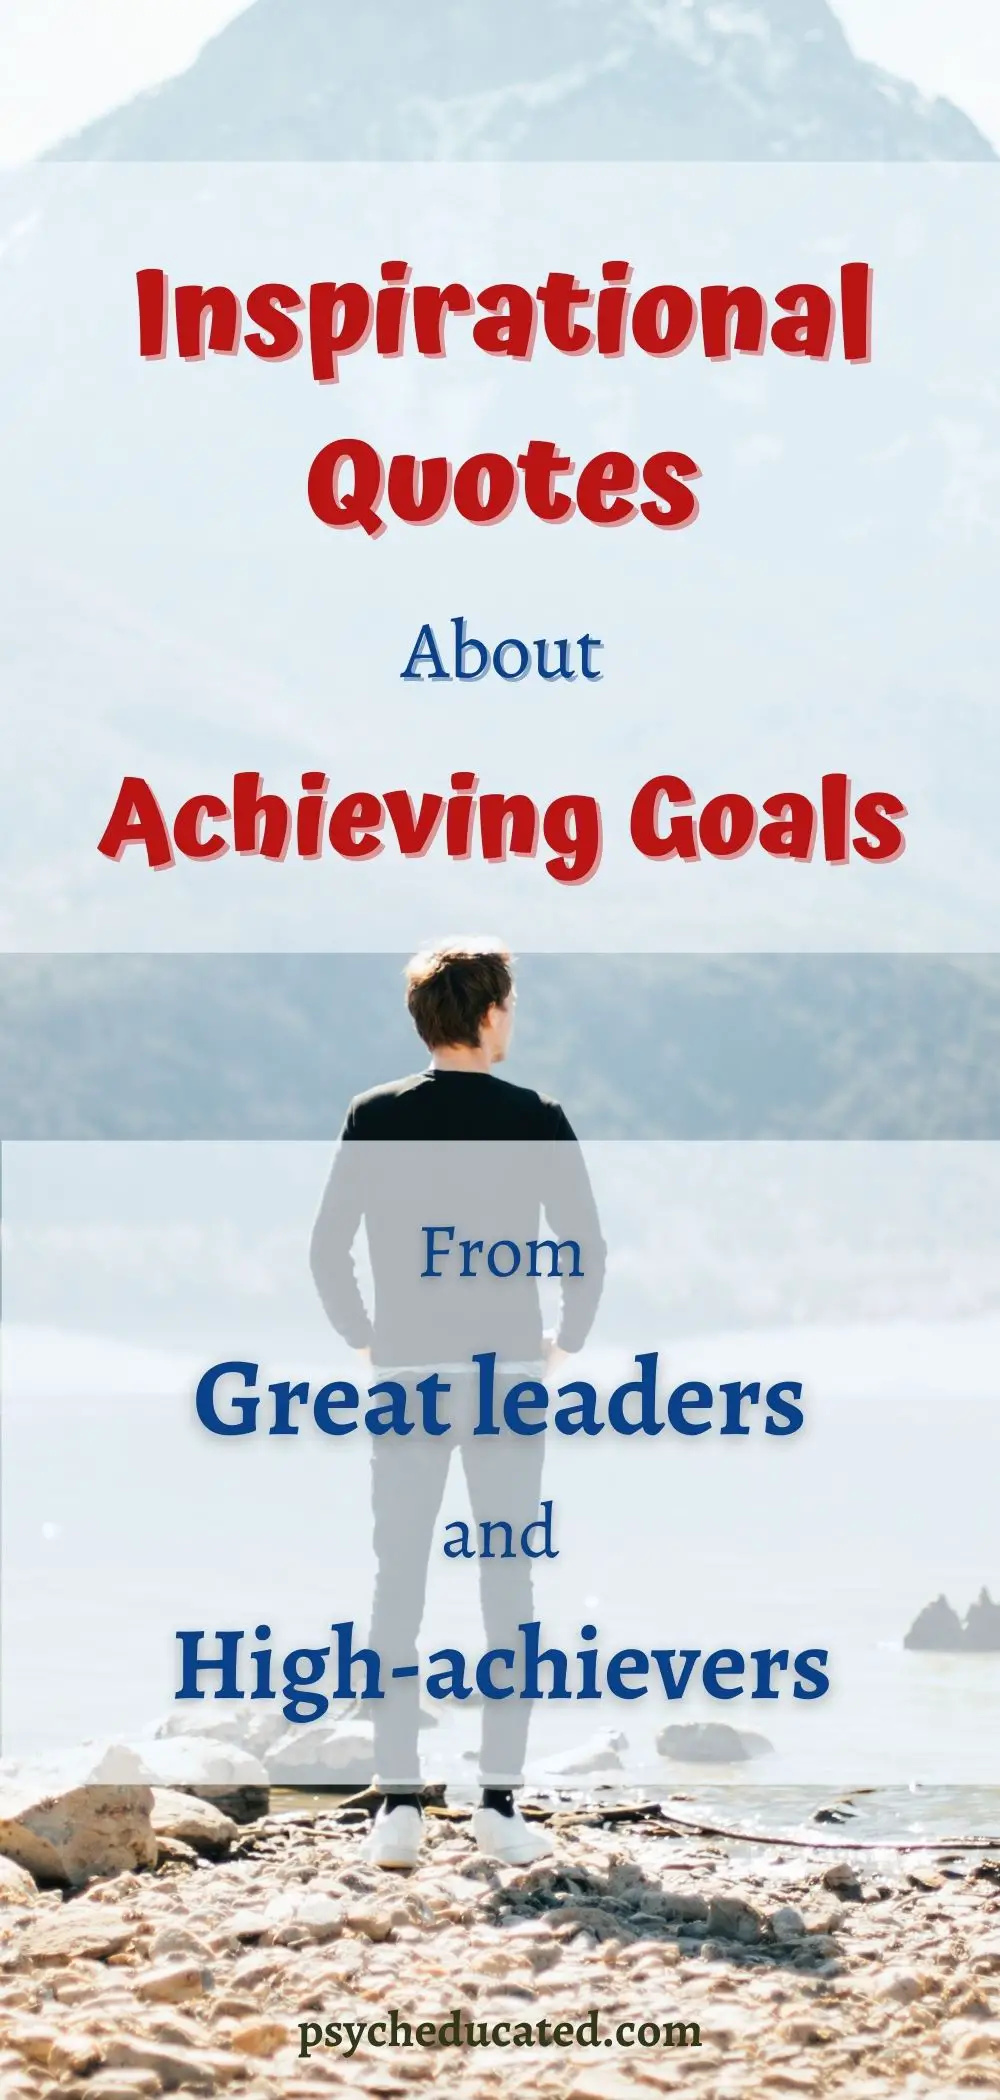 Inspirational-quotes-about-achieving-goals-